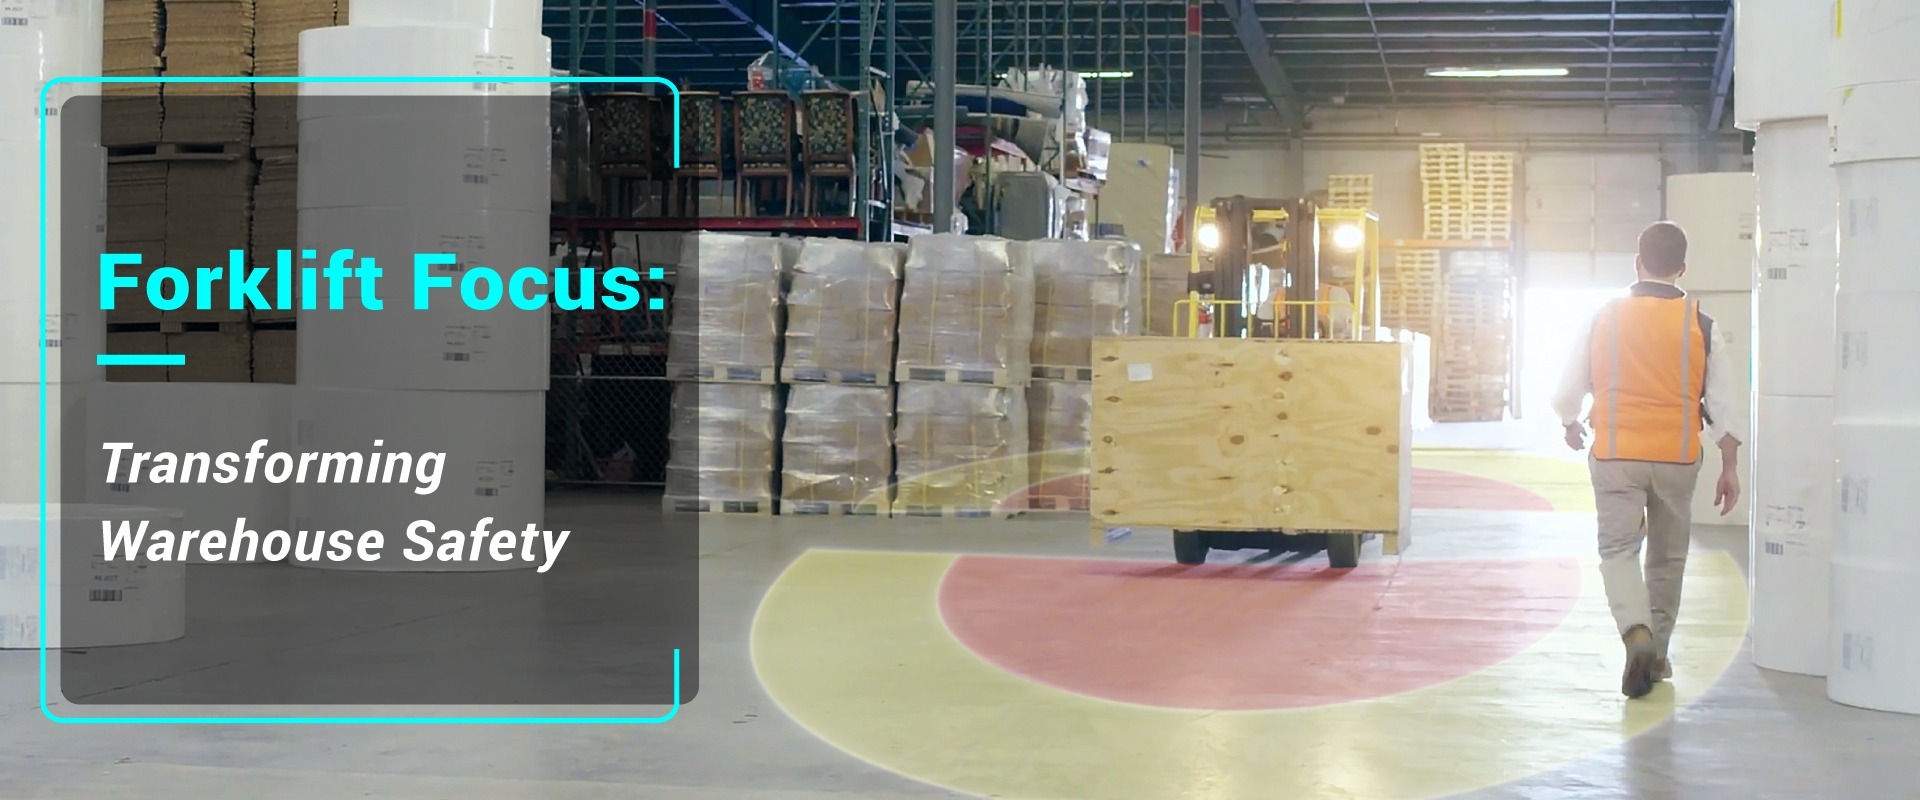 Forklift Focus: Transforming Warehouse Safety